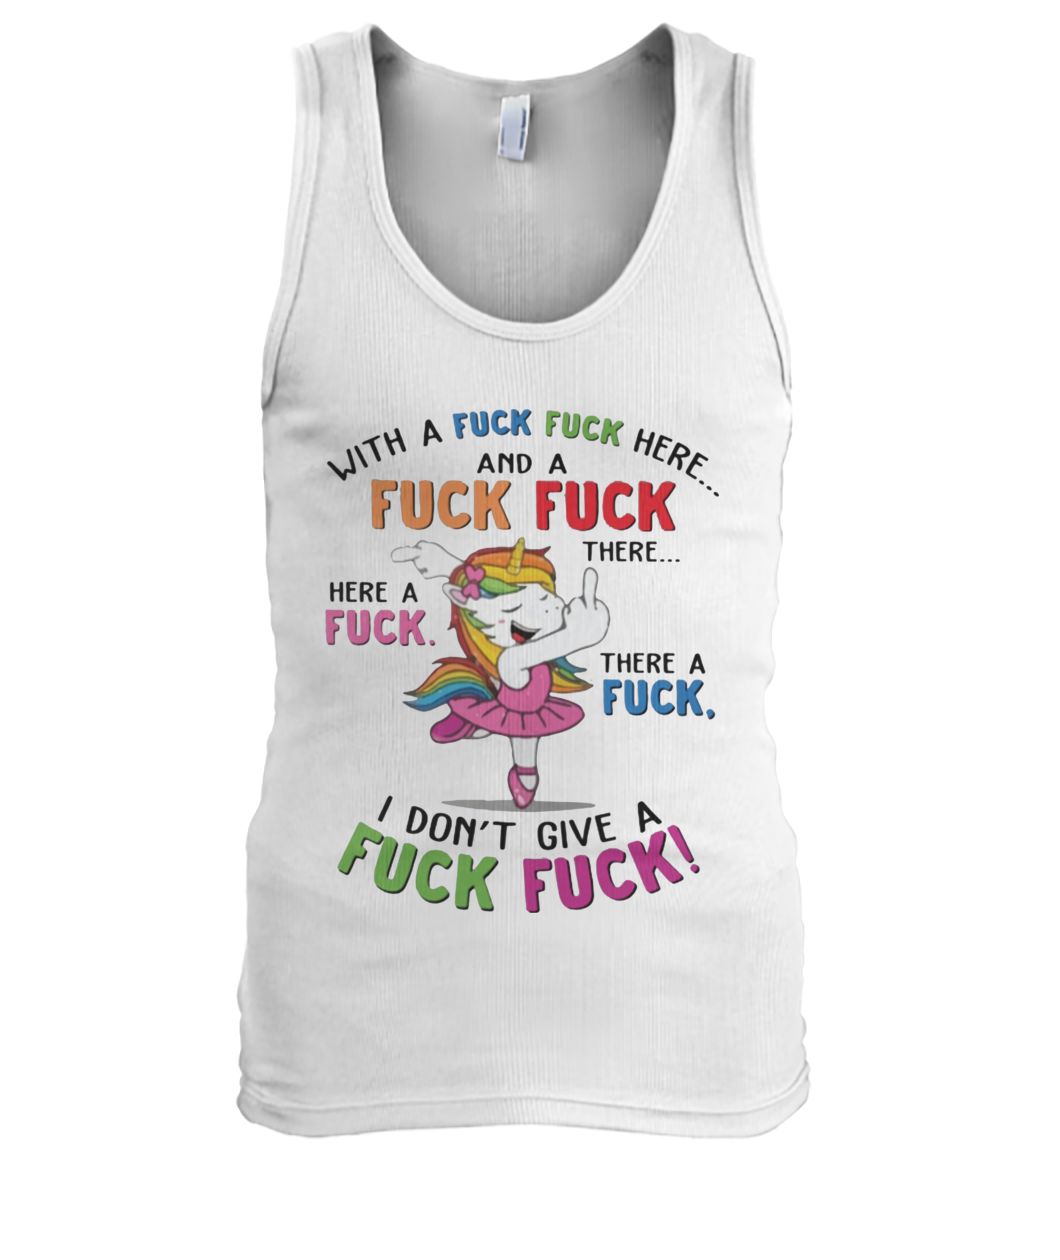 Unicorn with a fuck fuck here and a fuck fuck there men's tank top